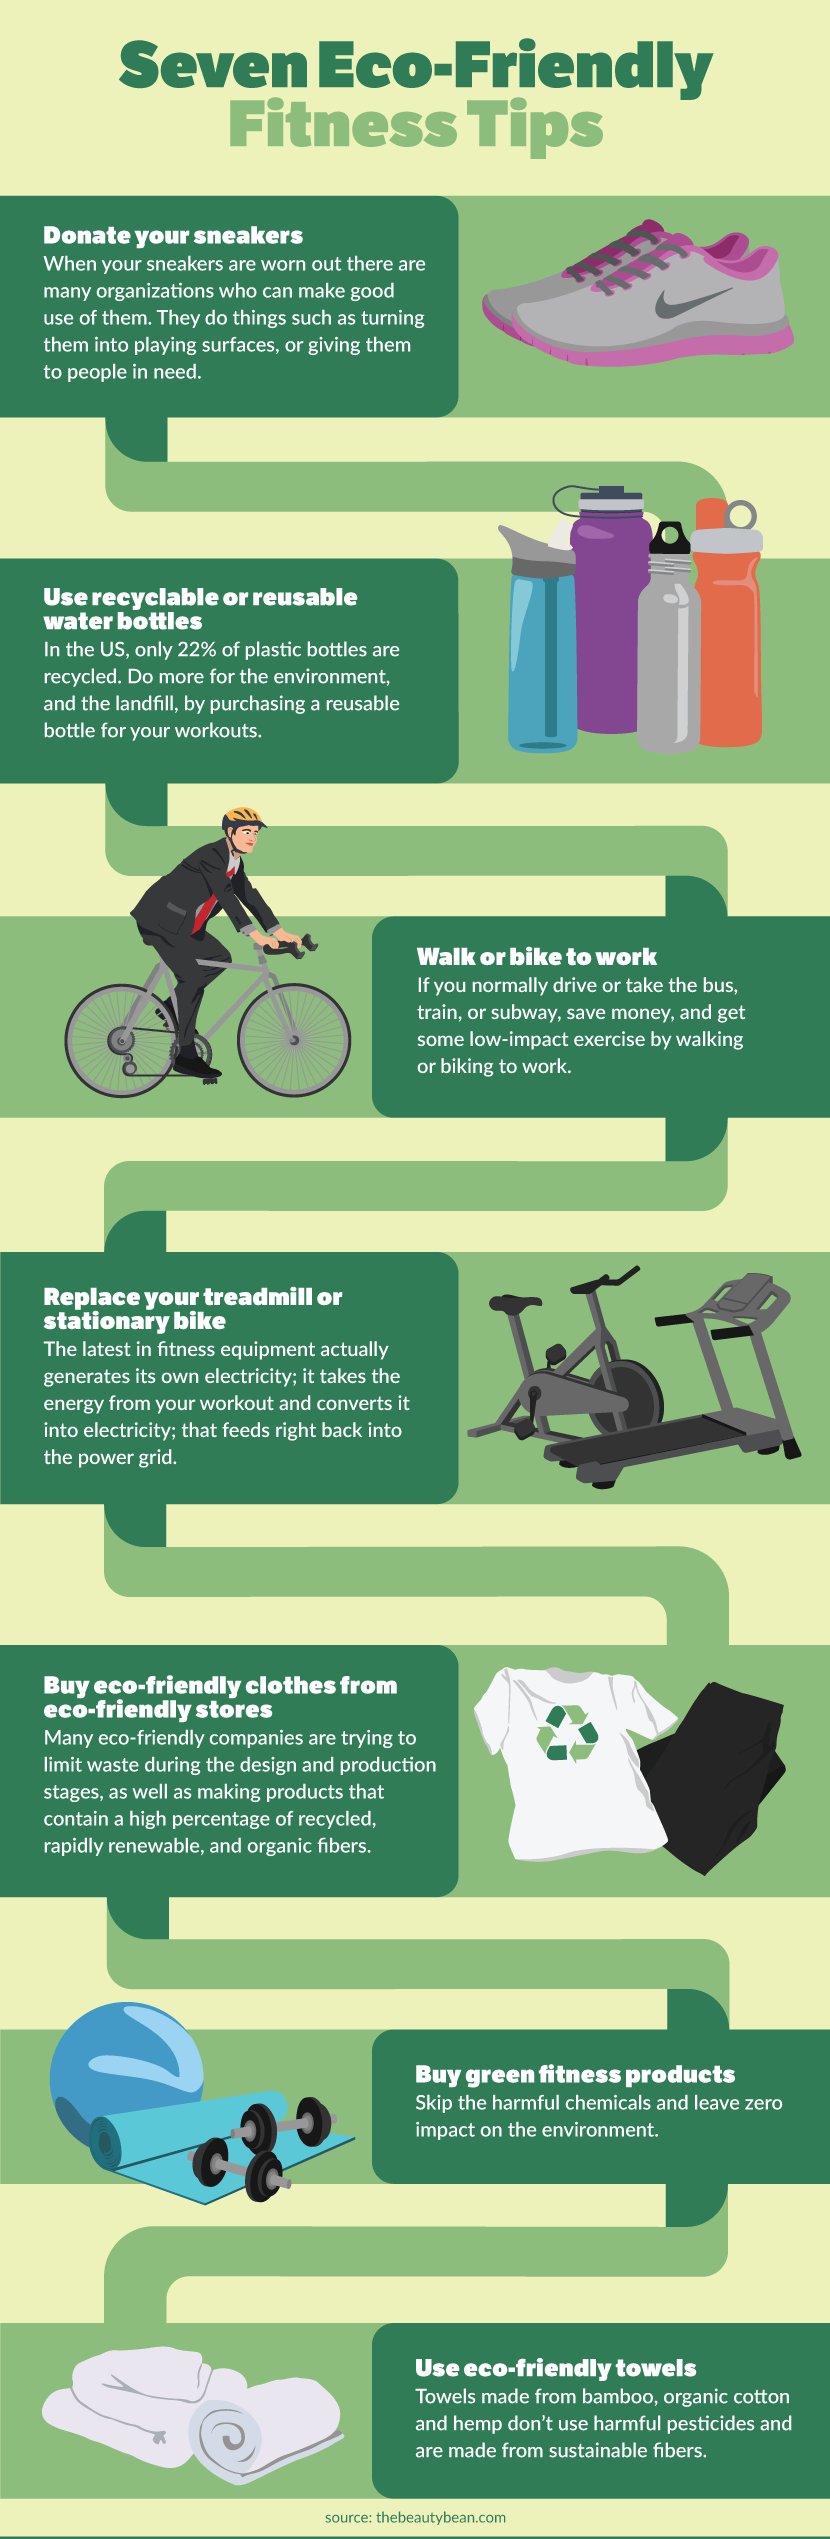 Eco-Friendly Fitness Tips - Green Workout